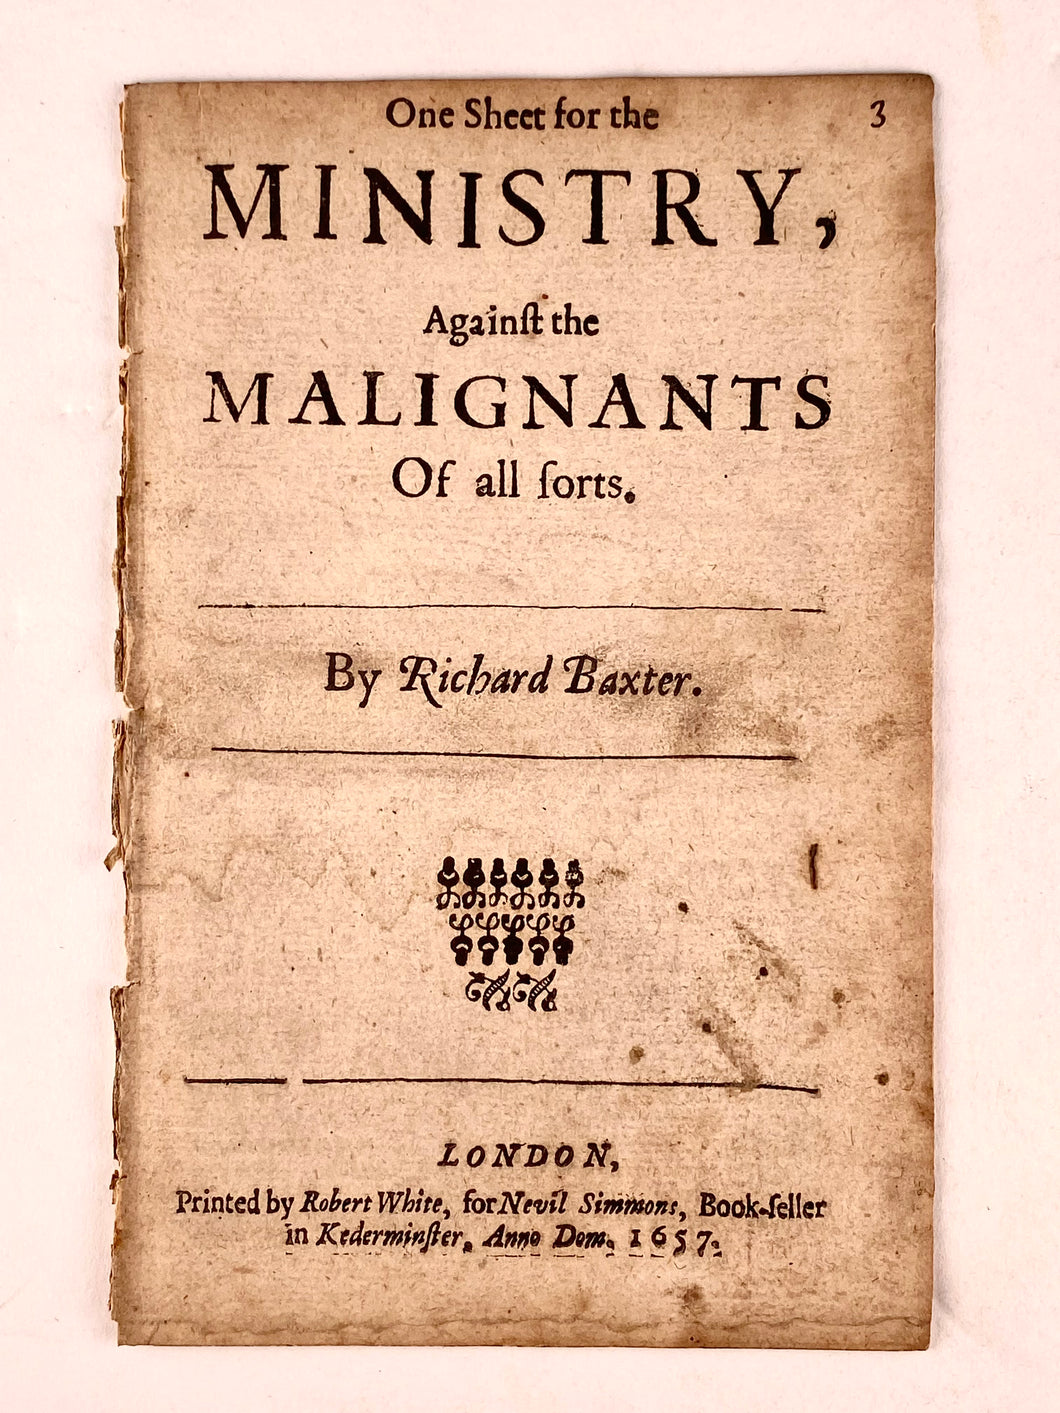 1657 RICHARD BAXTER. One Sheet for the Ministry, Against the Malignants of All Sorts. Rare Kederminster Published Tract.